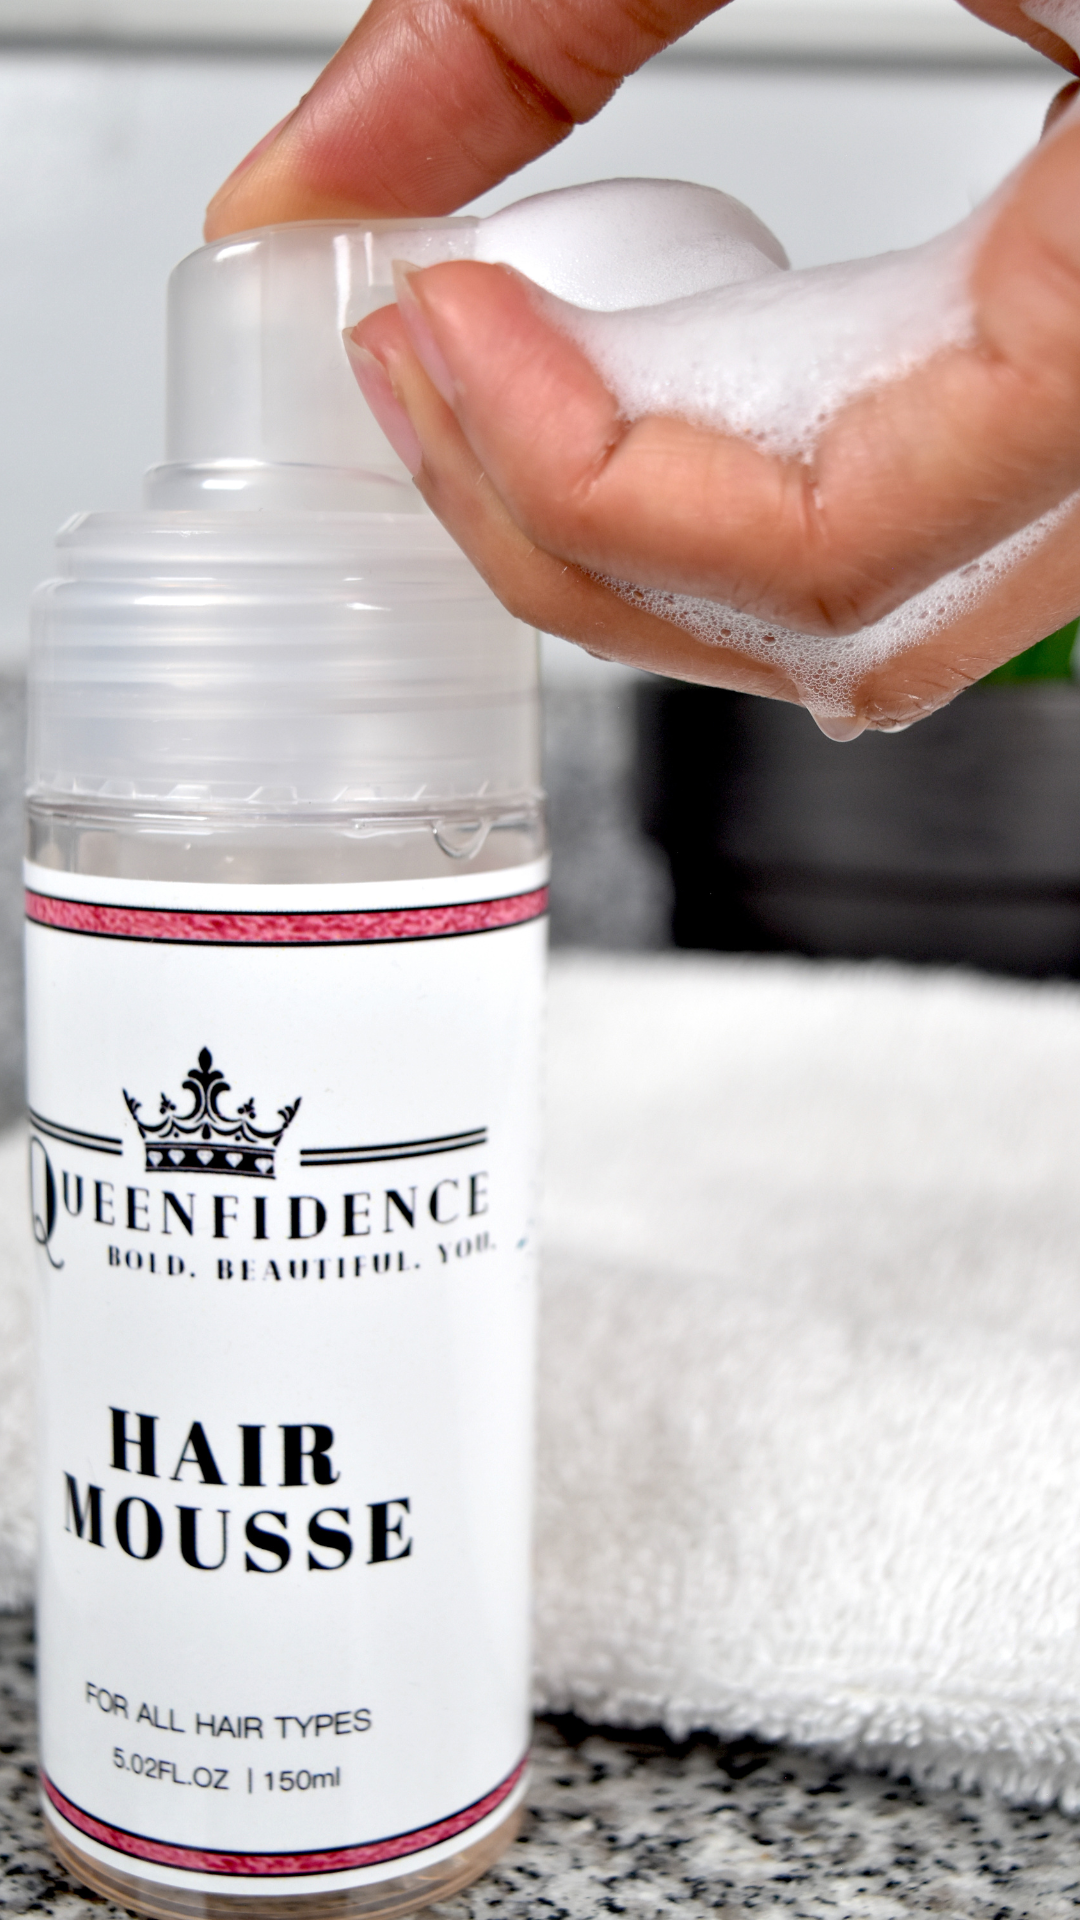 Styling Foam Hair Mousse – Queenfidence